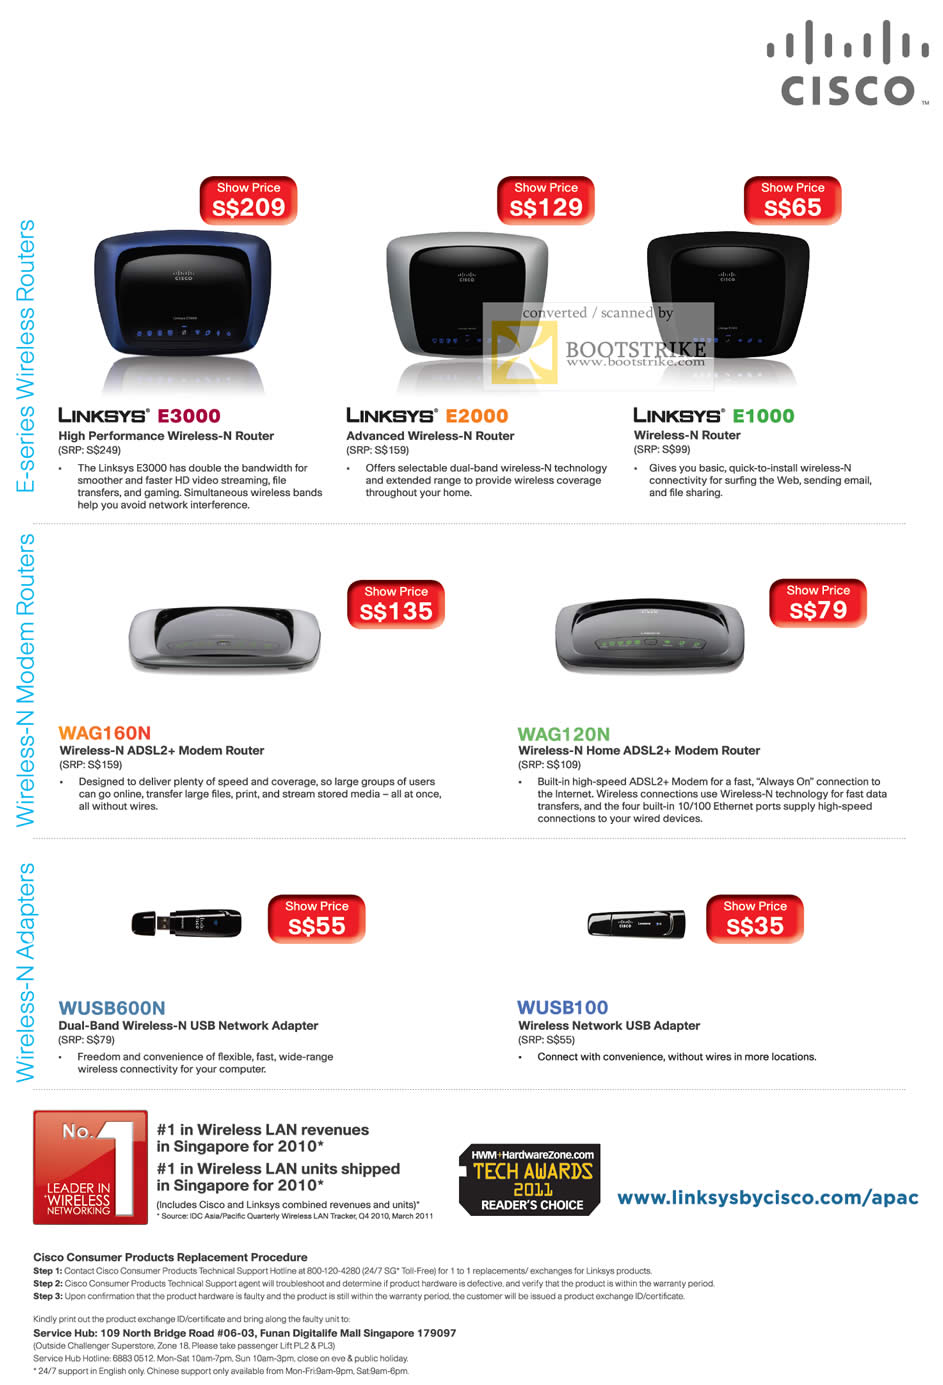 PC Show 2011 price list image brochure of Linksys Cisco Wireless Routers Modem Adapters E3000 E2000 E1000 WAG160N WAG120N WUSB600N WUSB100